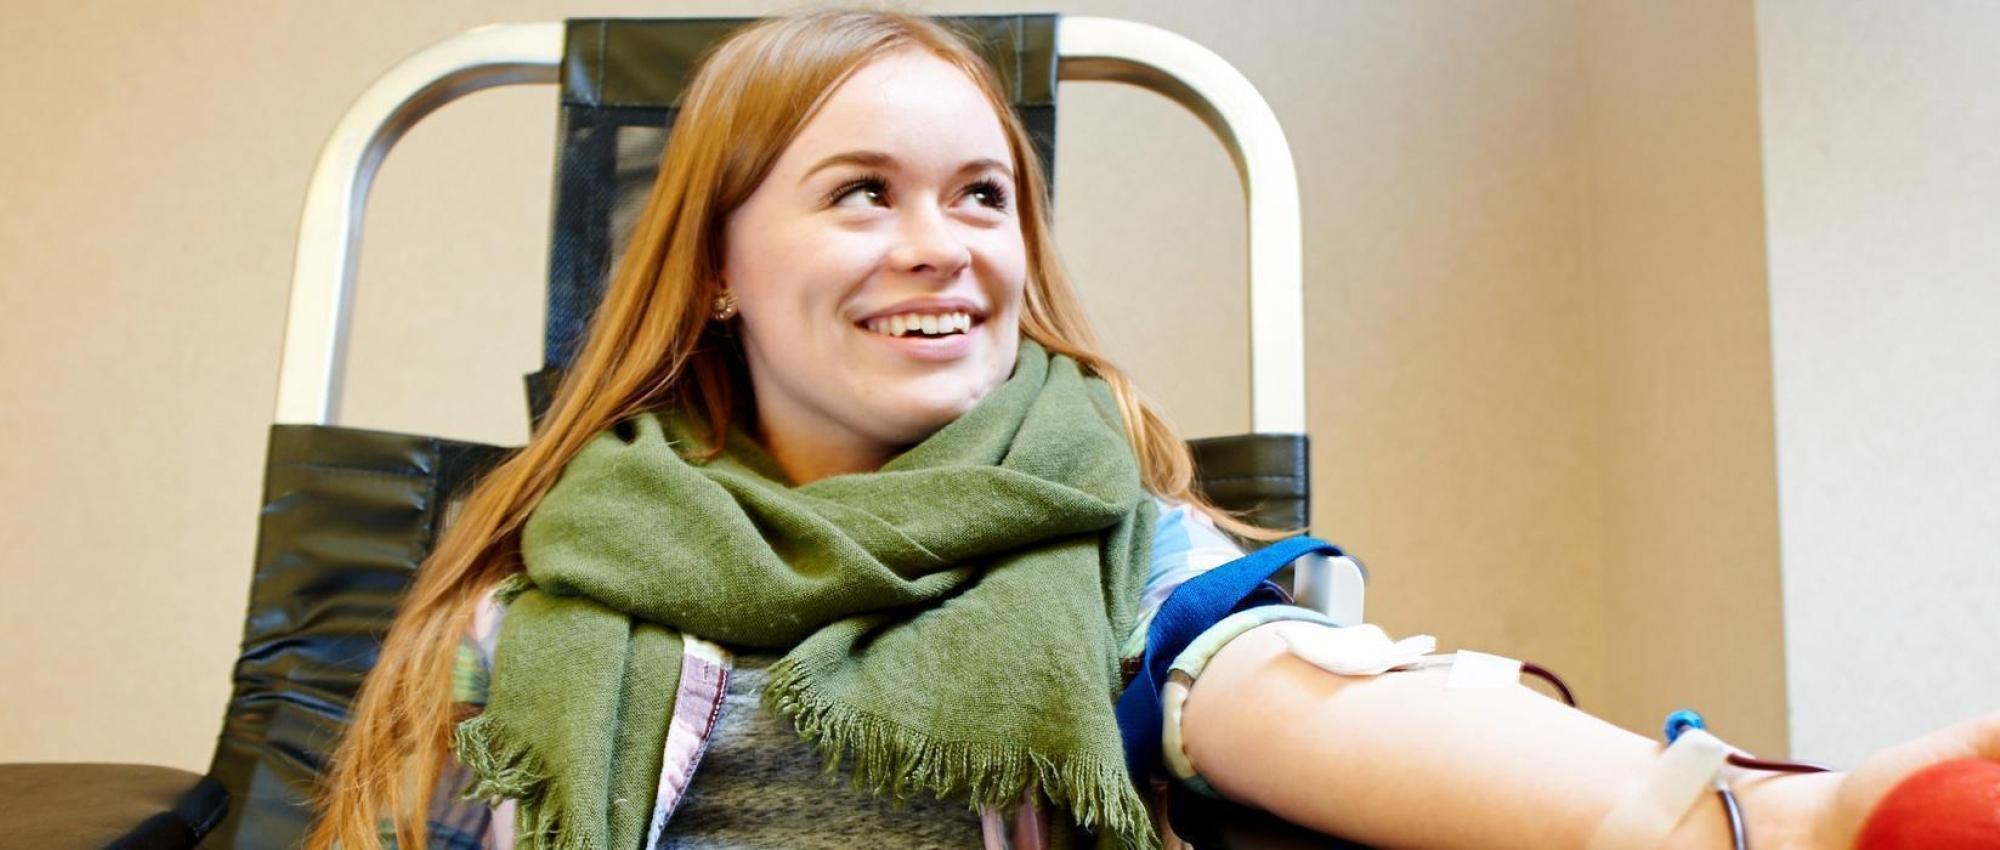 Our eligibility requirements for blood donors have changed.